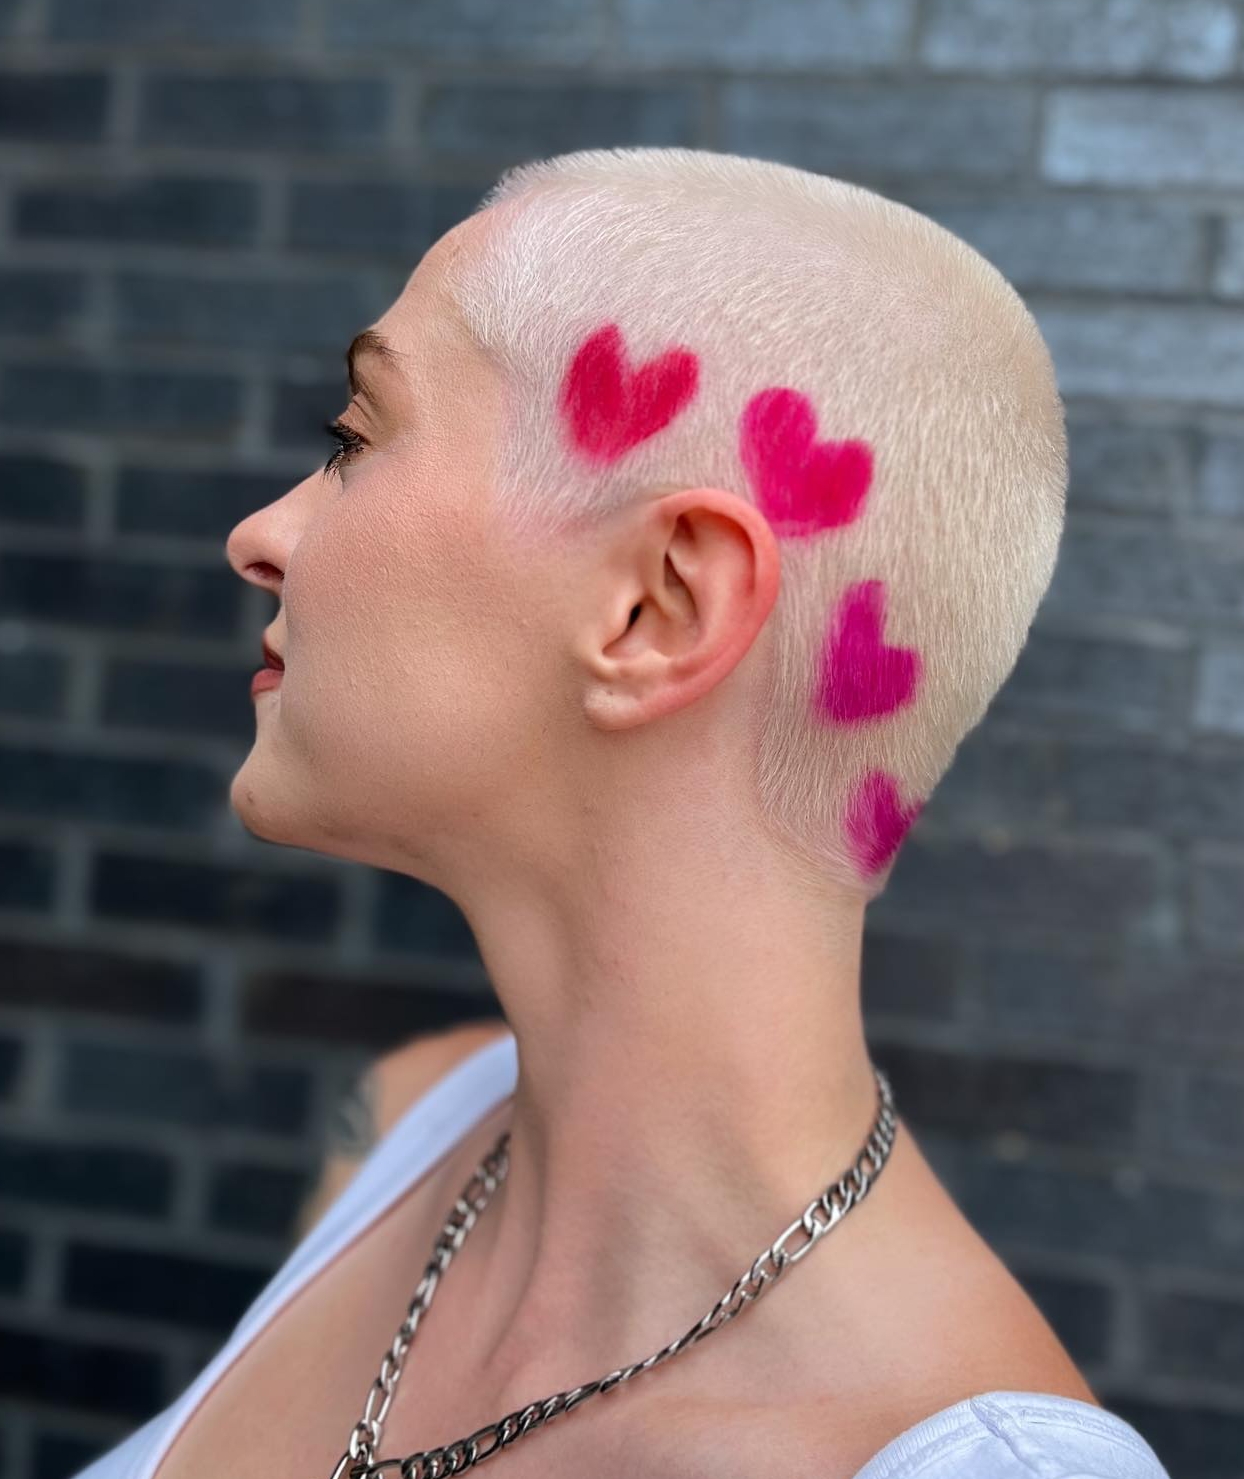 Buzz Cut on Blonde Hair with Coloured Heart-Shaped Design